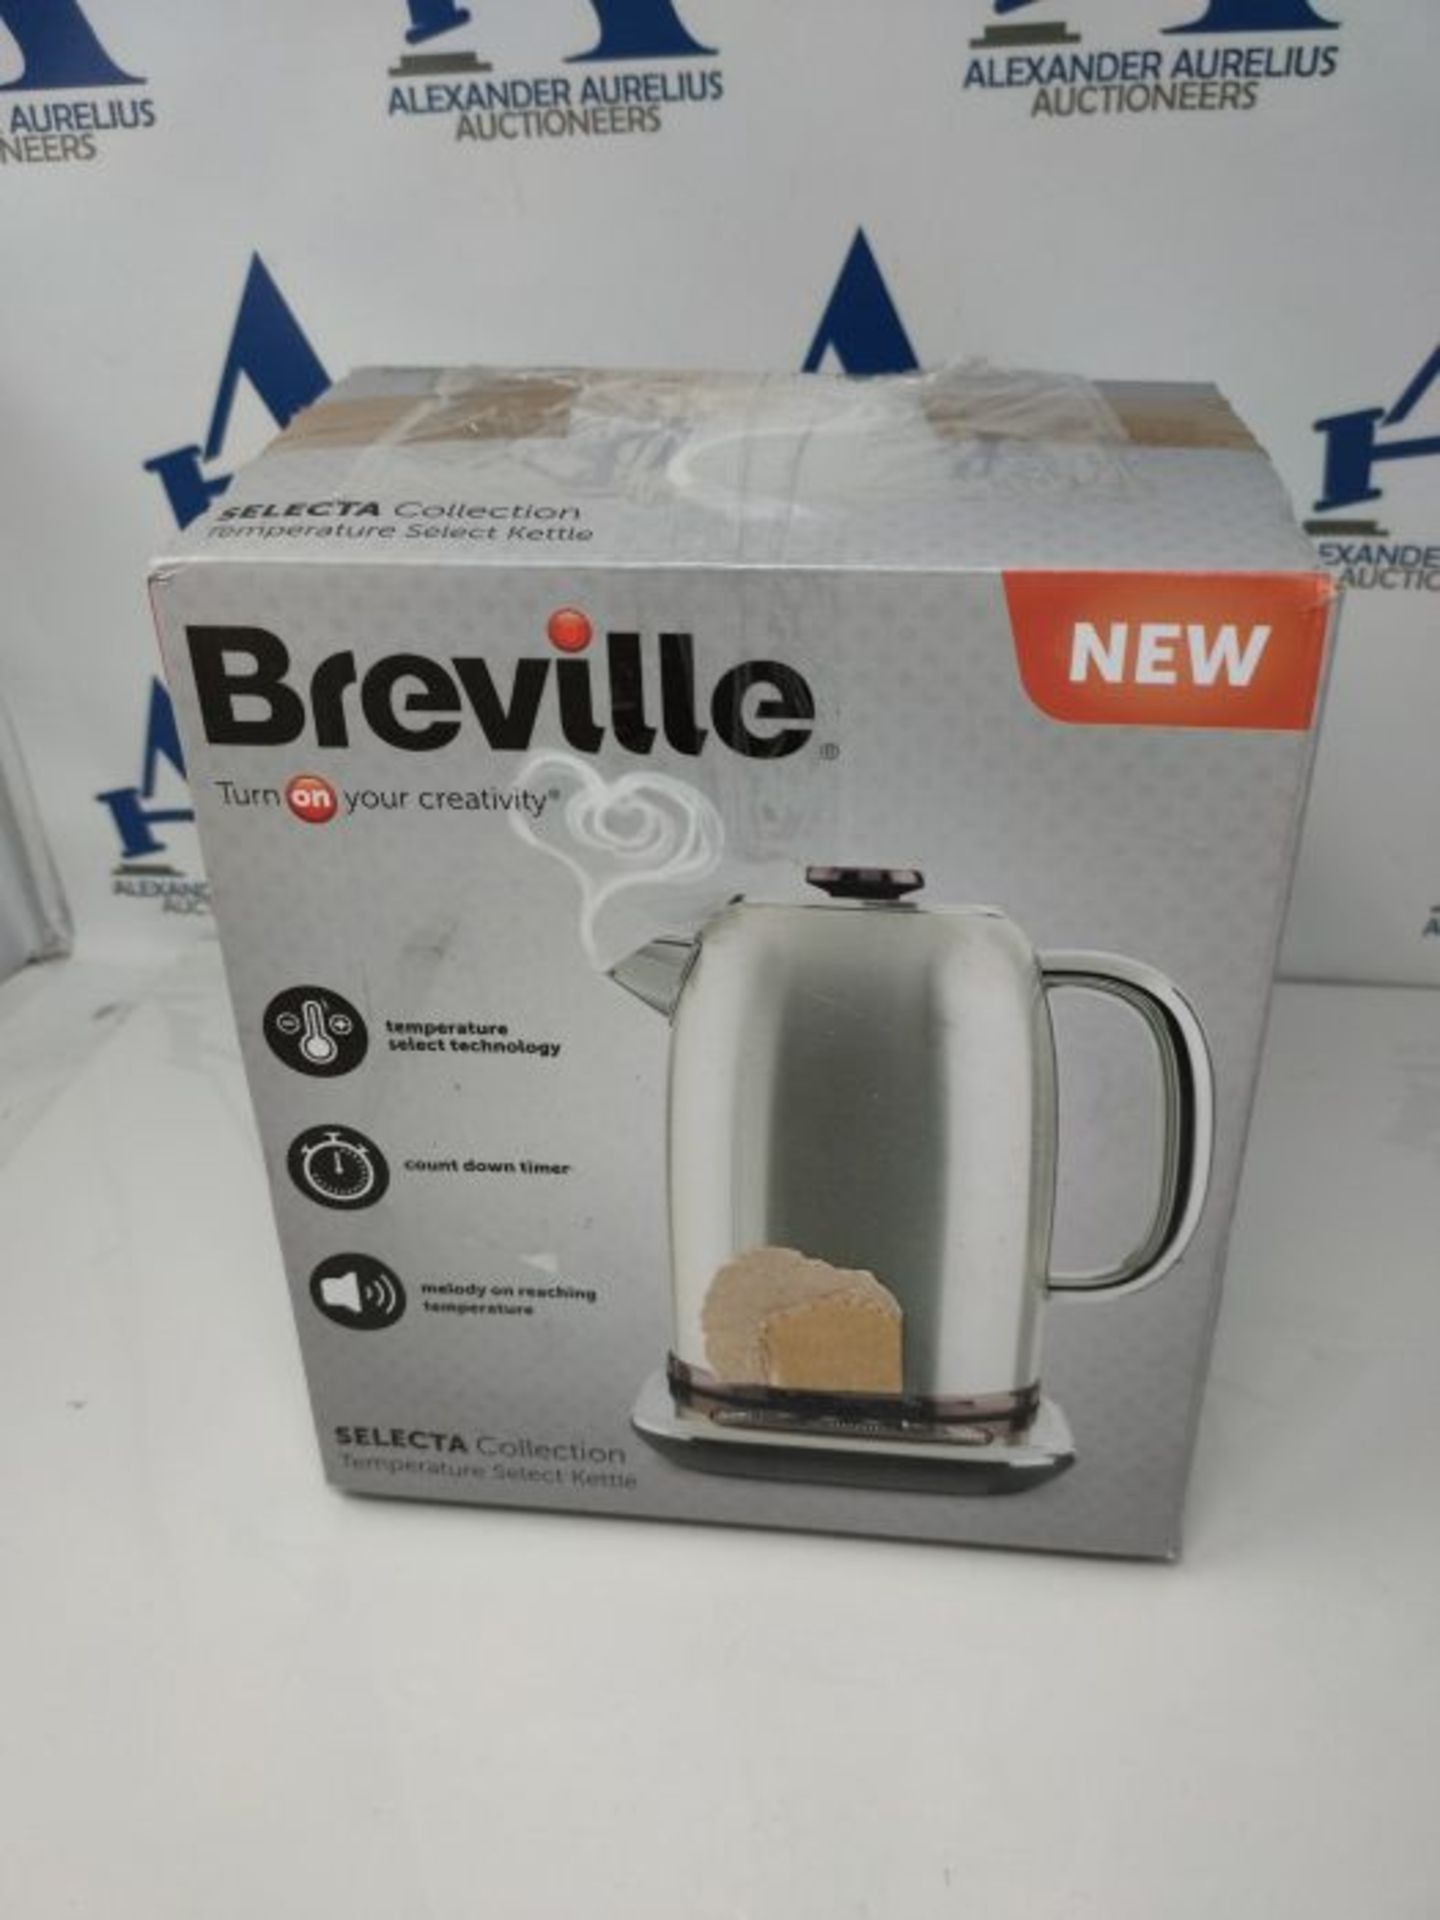 RRP £64.00 Breville Temperature Select Electric Kettle | 1.7 L | 3kW Fast Boil | Smart Digital Co - Image 2 of 3